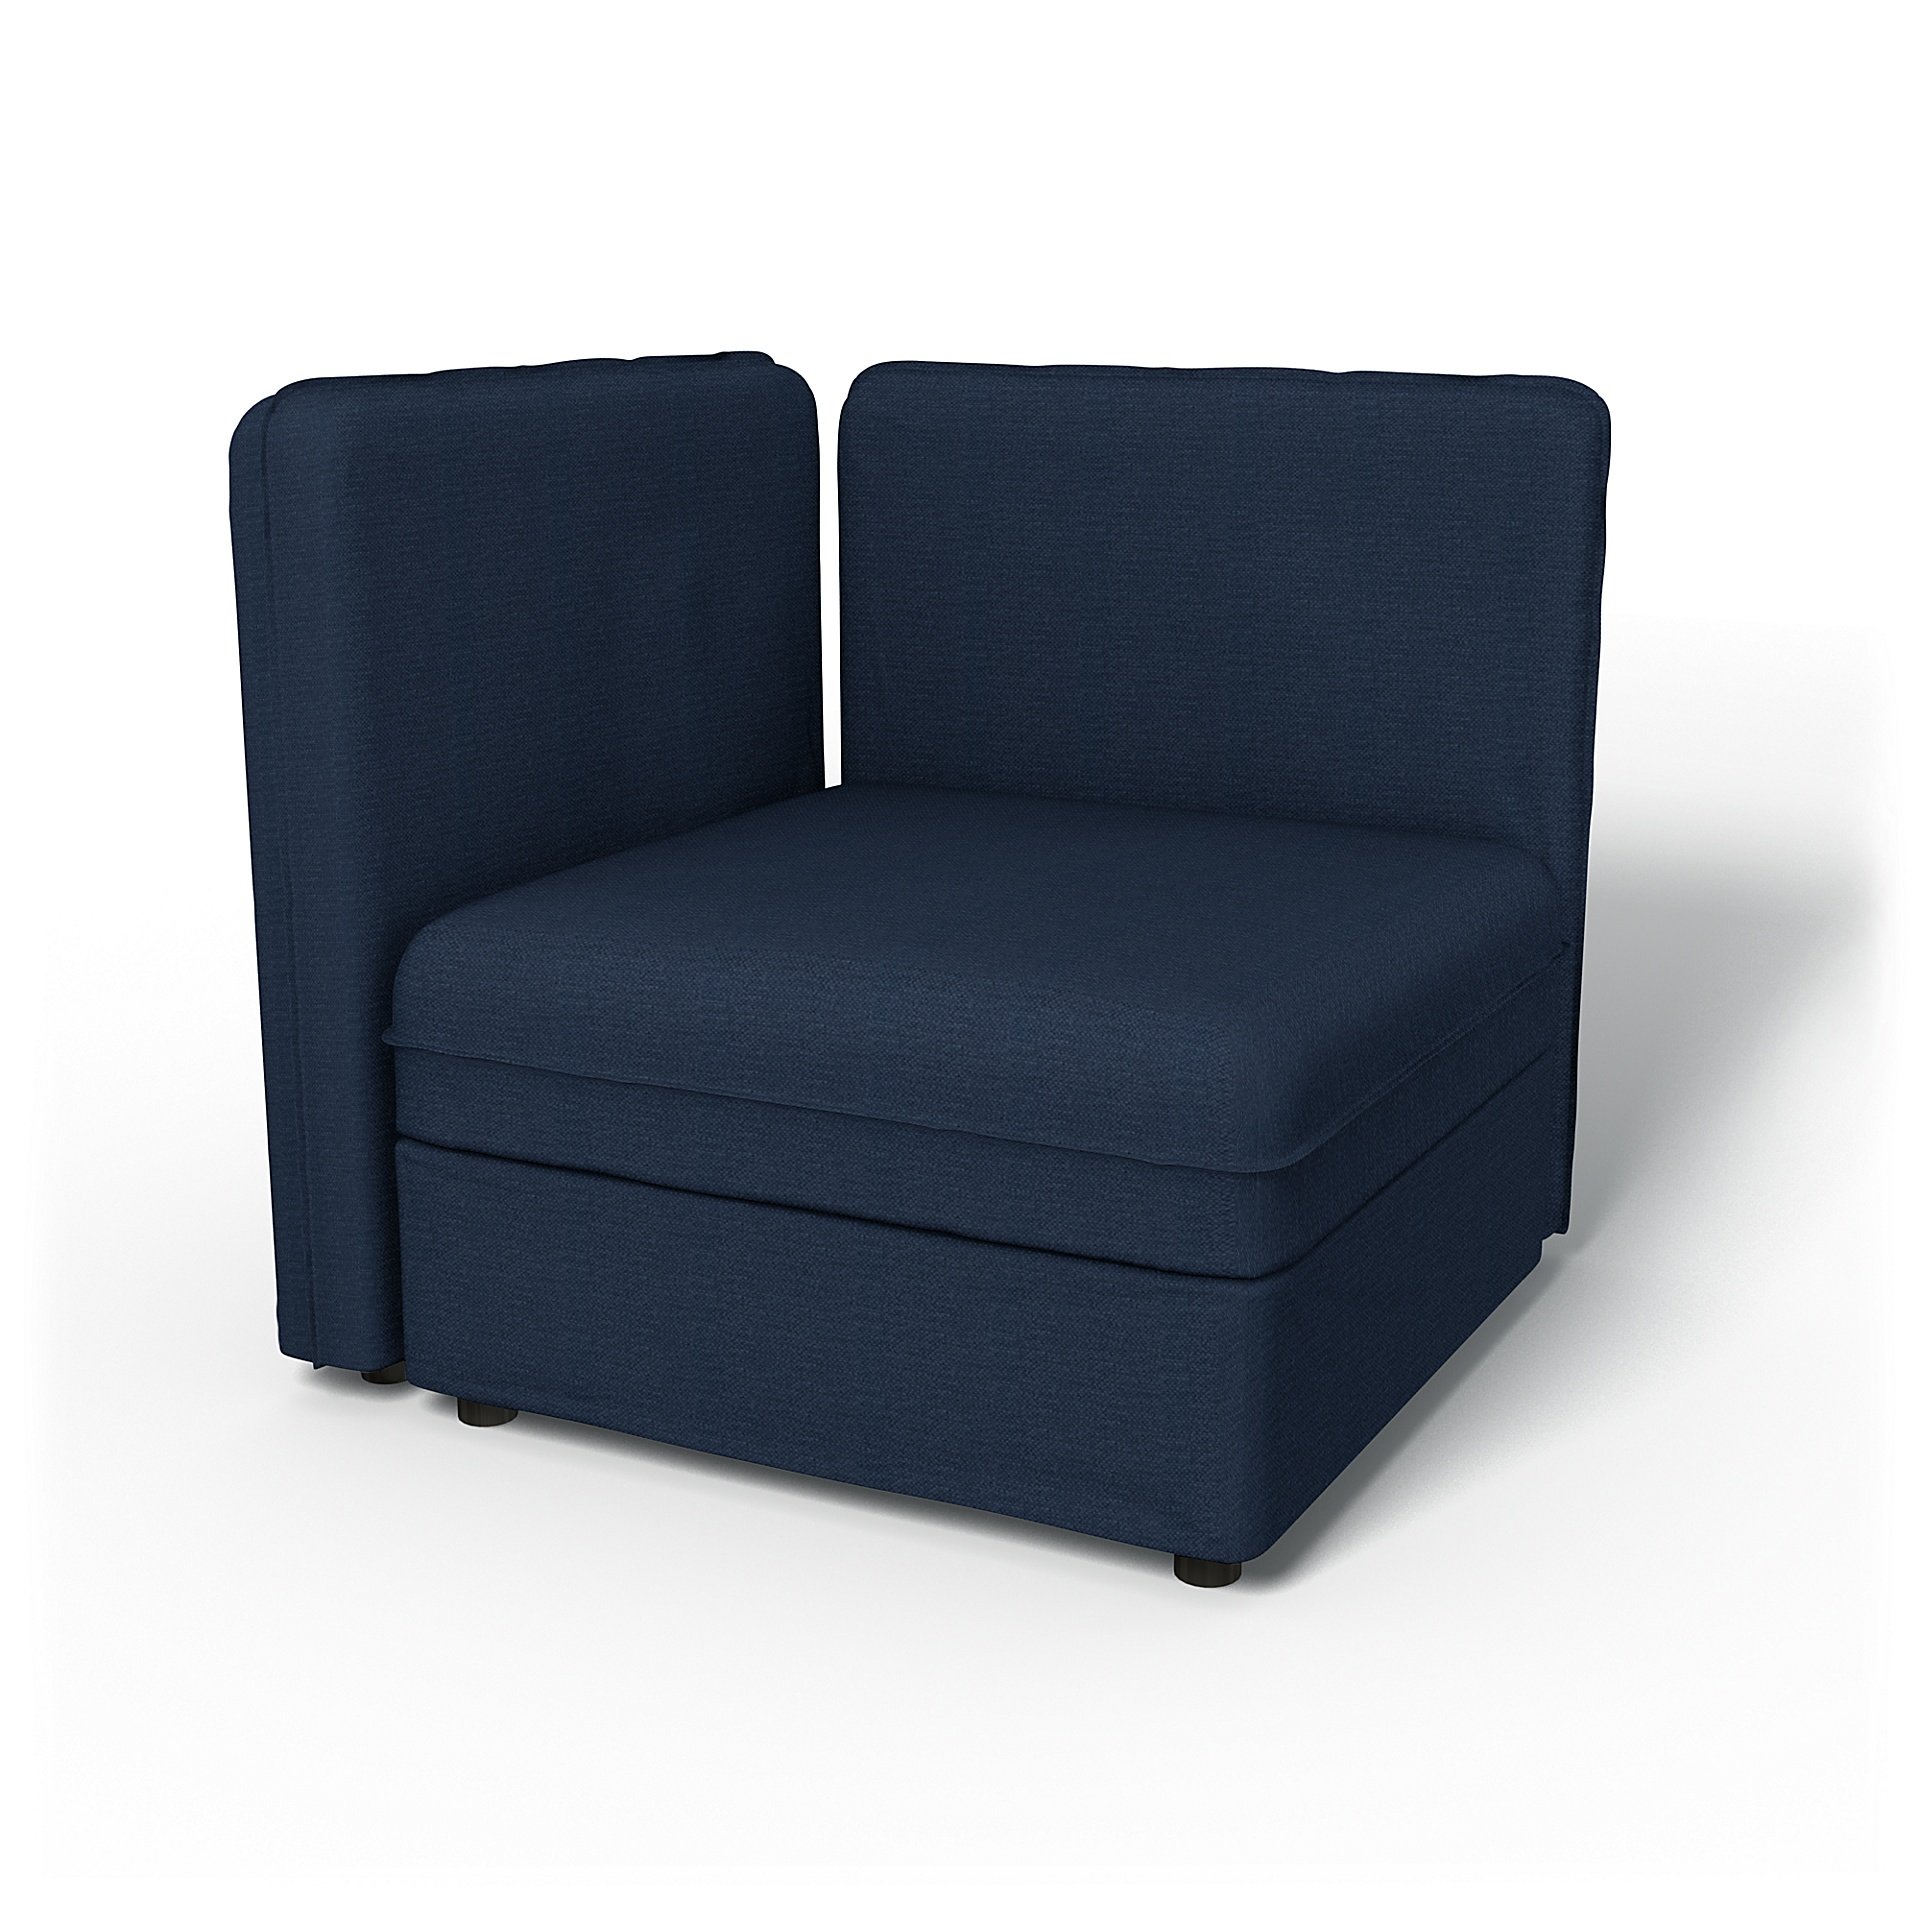 IKEA - Vallentuna Seat Module with Low Back and Storage Cover 80x80cm 32x32in, Navy Blue, Linen - Be